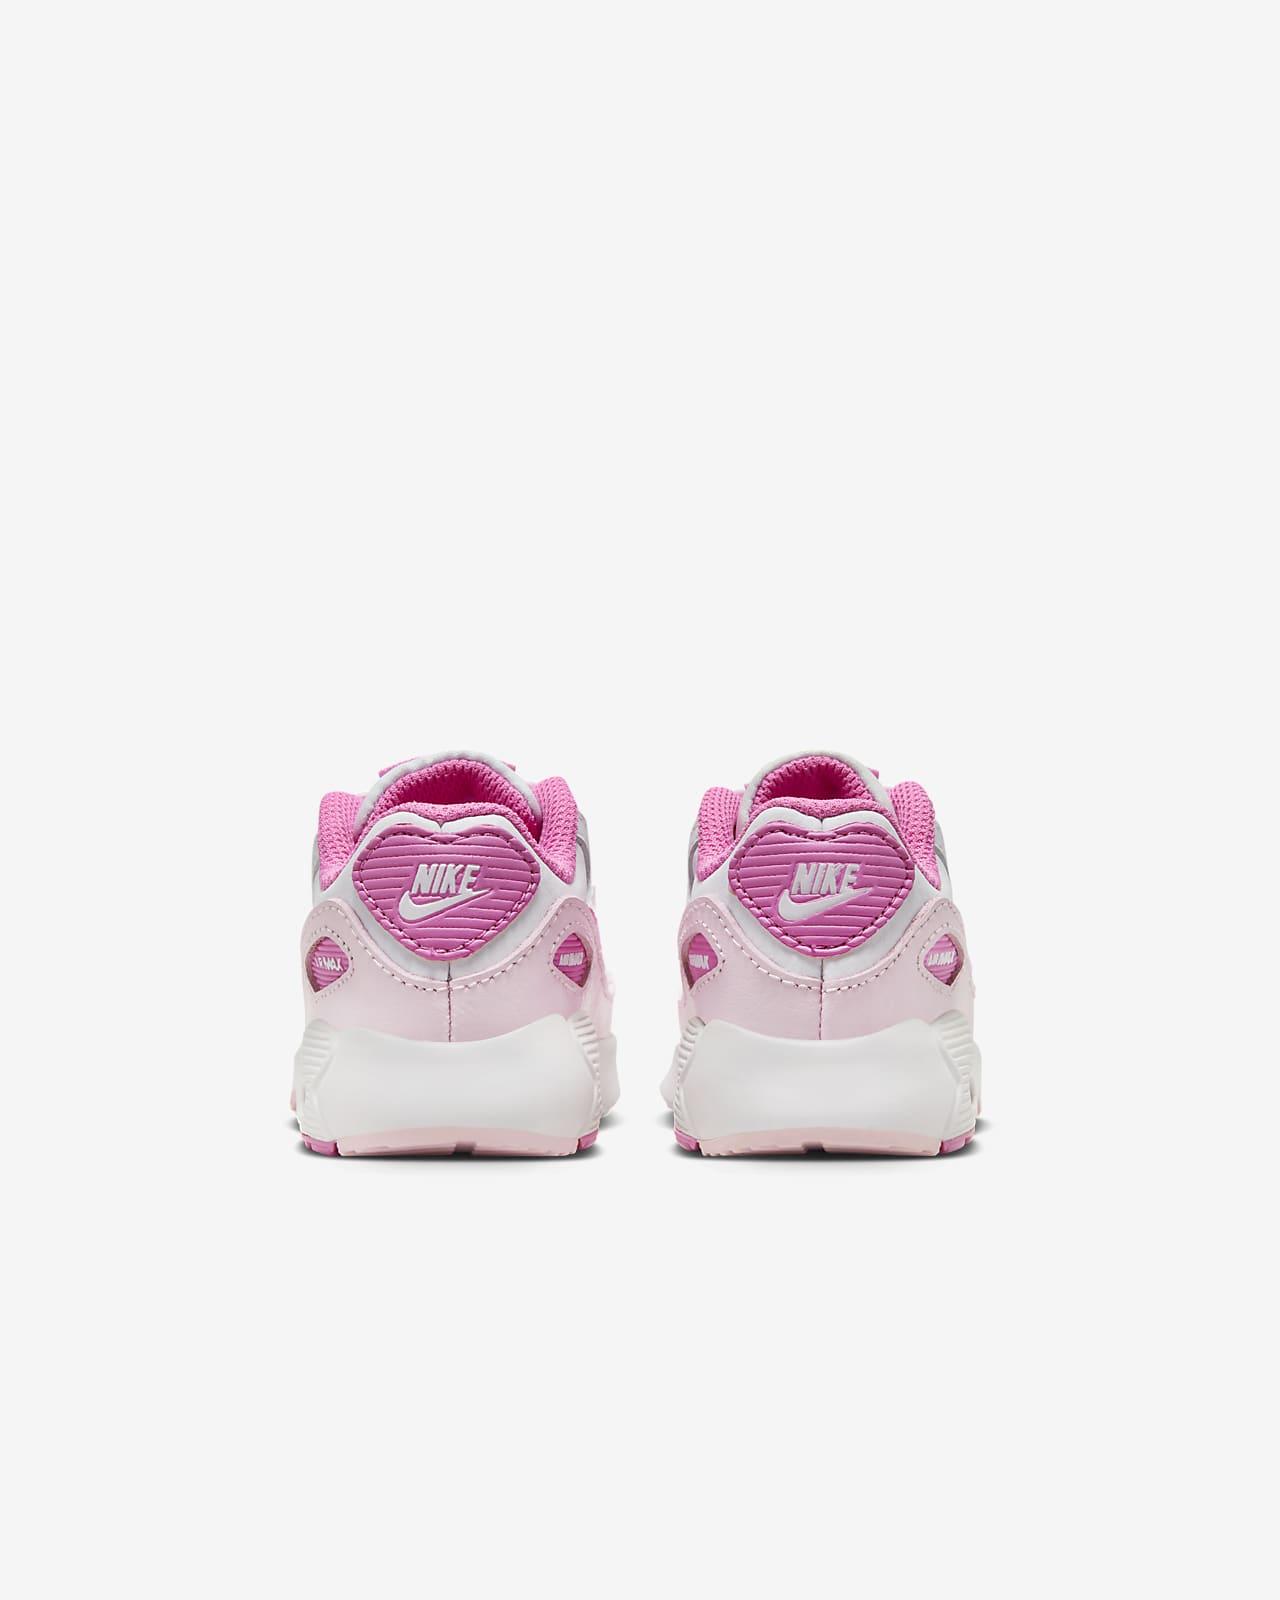 Nike Air Max 90 Baby/Toddler Shoes.